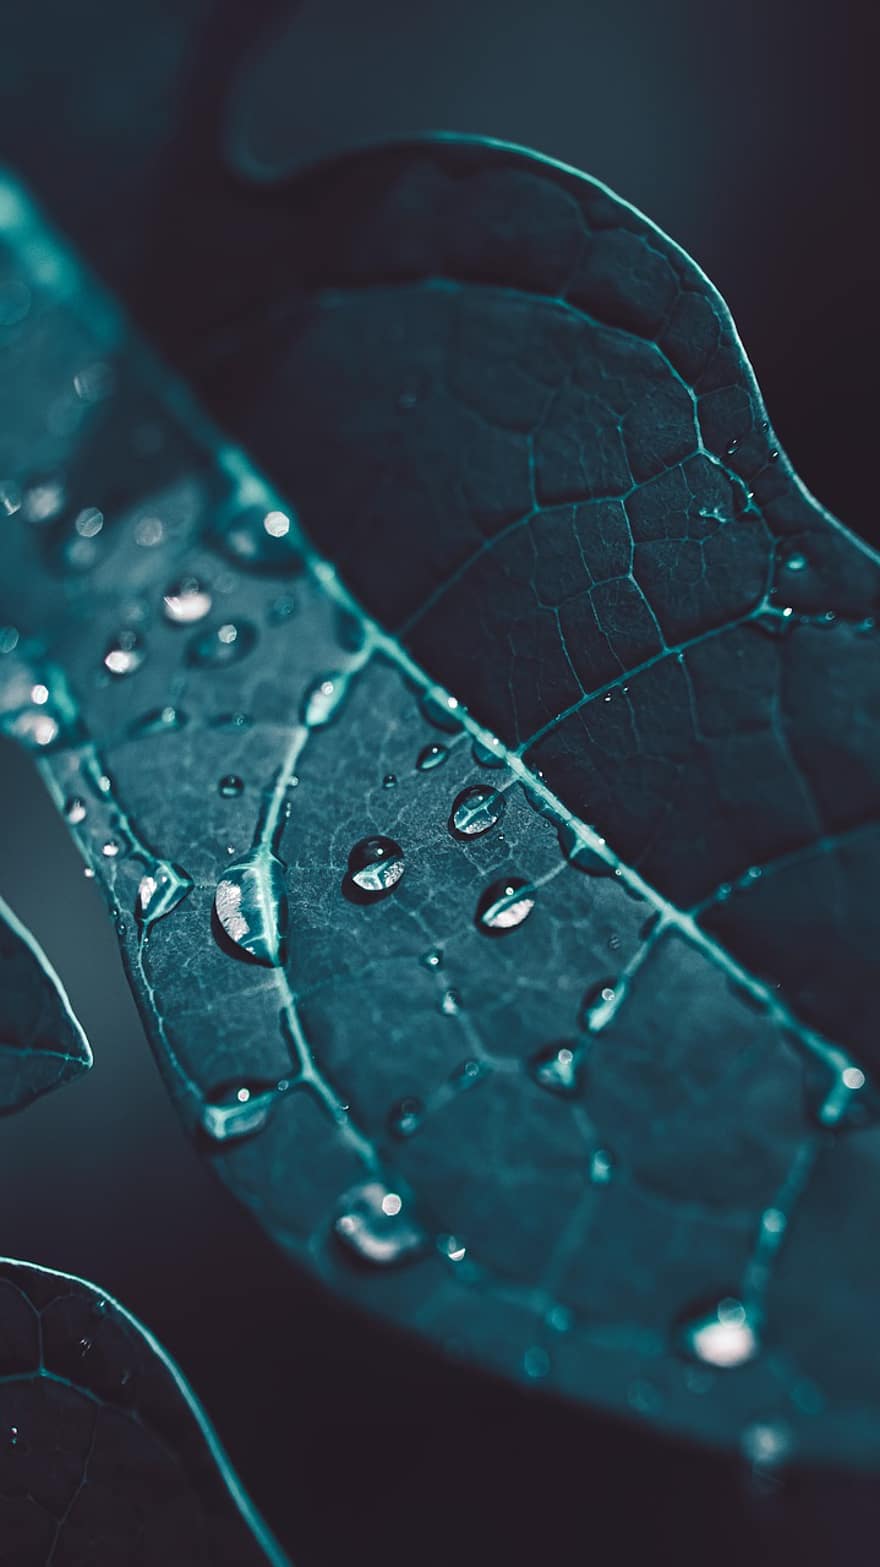 Leaf, Drop, Rain, Green, Nature, Leaves, Plants, Dew, Spring, Water, Environment